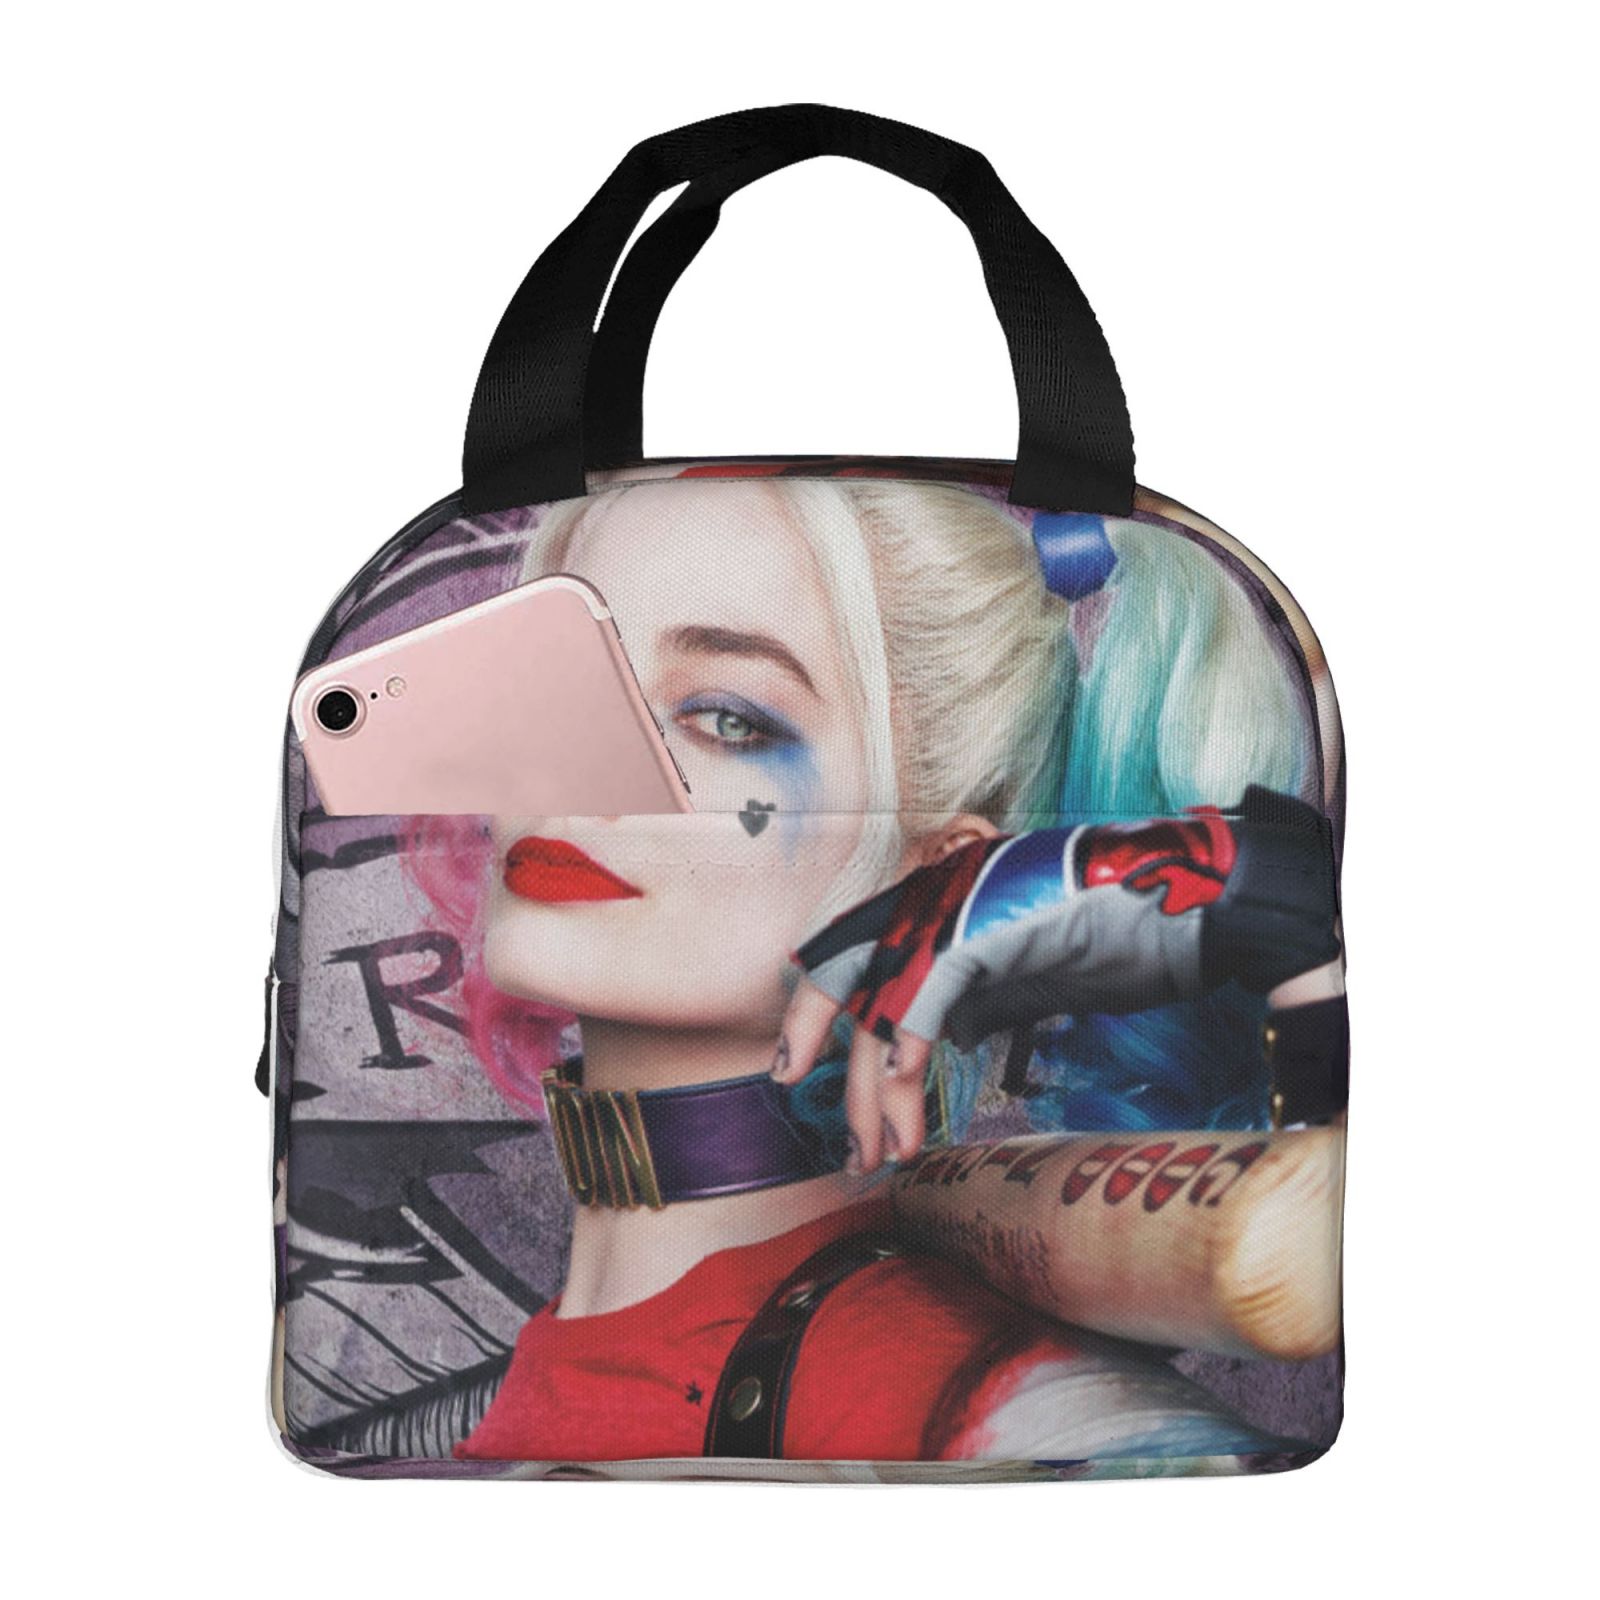 Harley Quinn Lunch Bag, Insulated Lunch Box Large Capacity Reusable ...